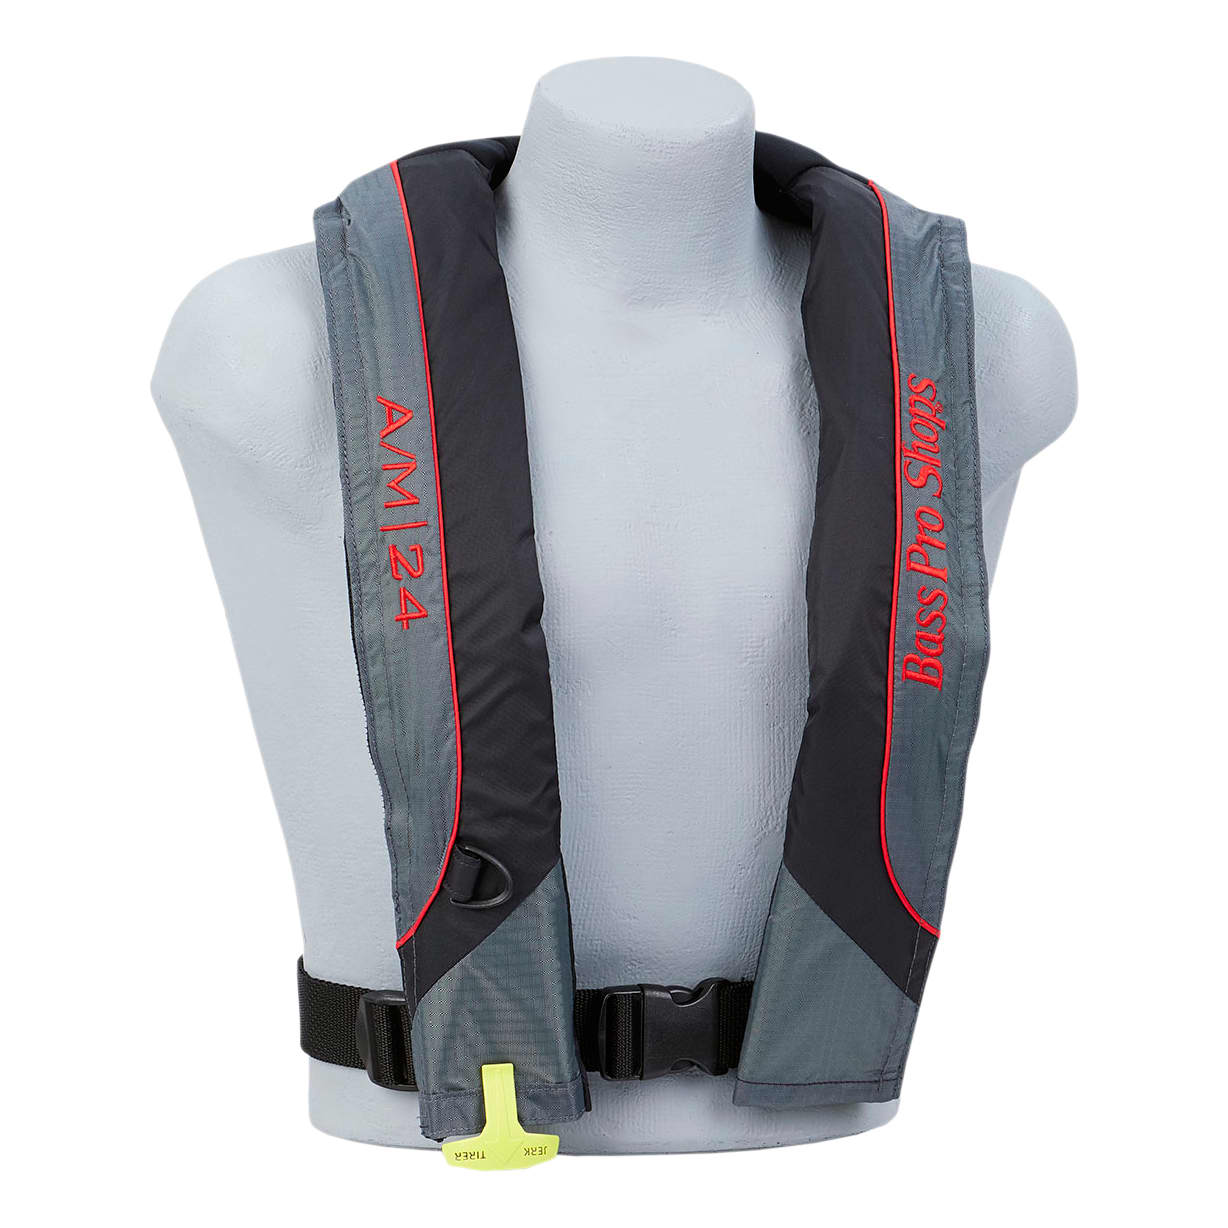 Bass Pro Shops® AM24 Auto/Manual Inflatable Life Vest - Red